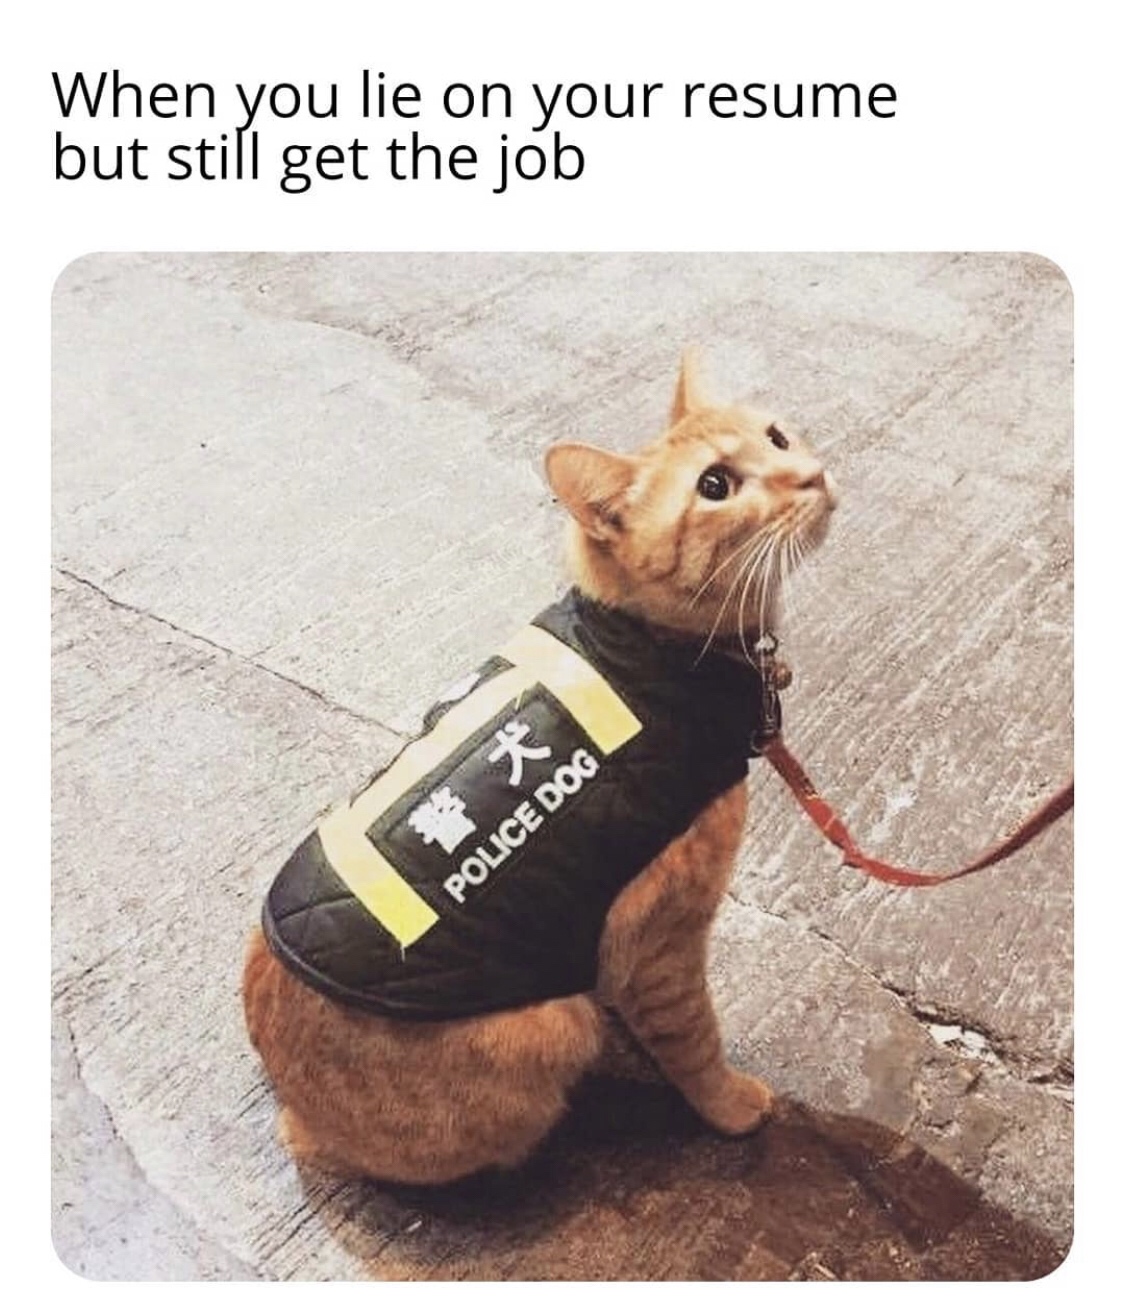 you lie on your resume and still get the job meme - When you lie on your resume but still get the job Police Dog